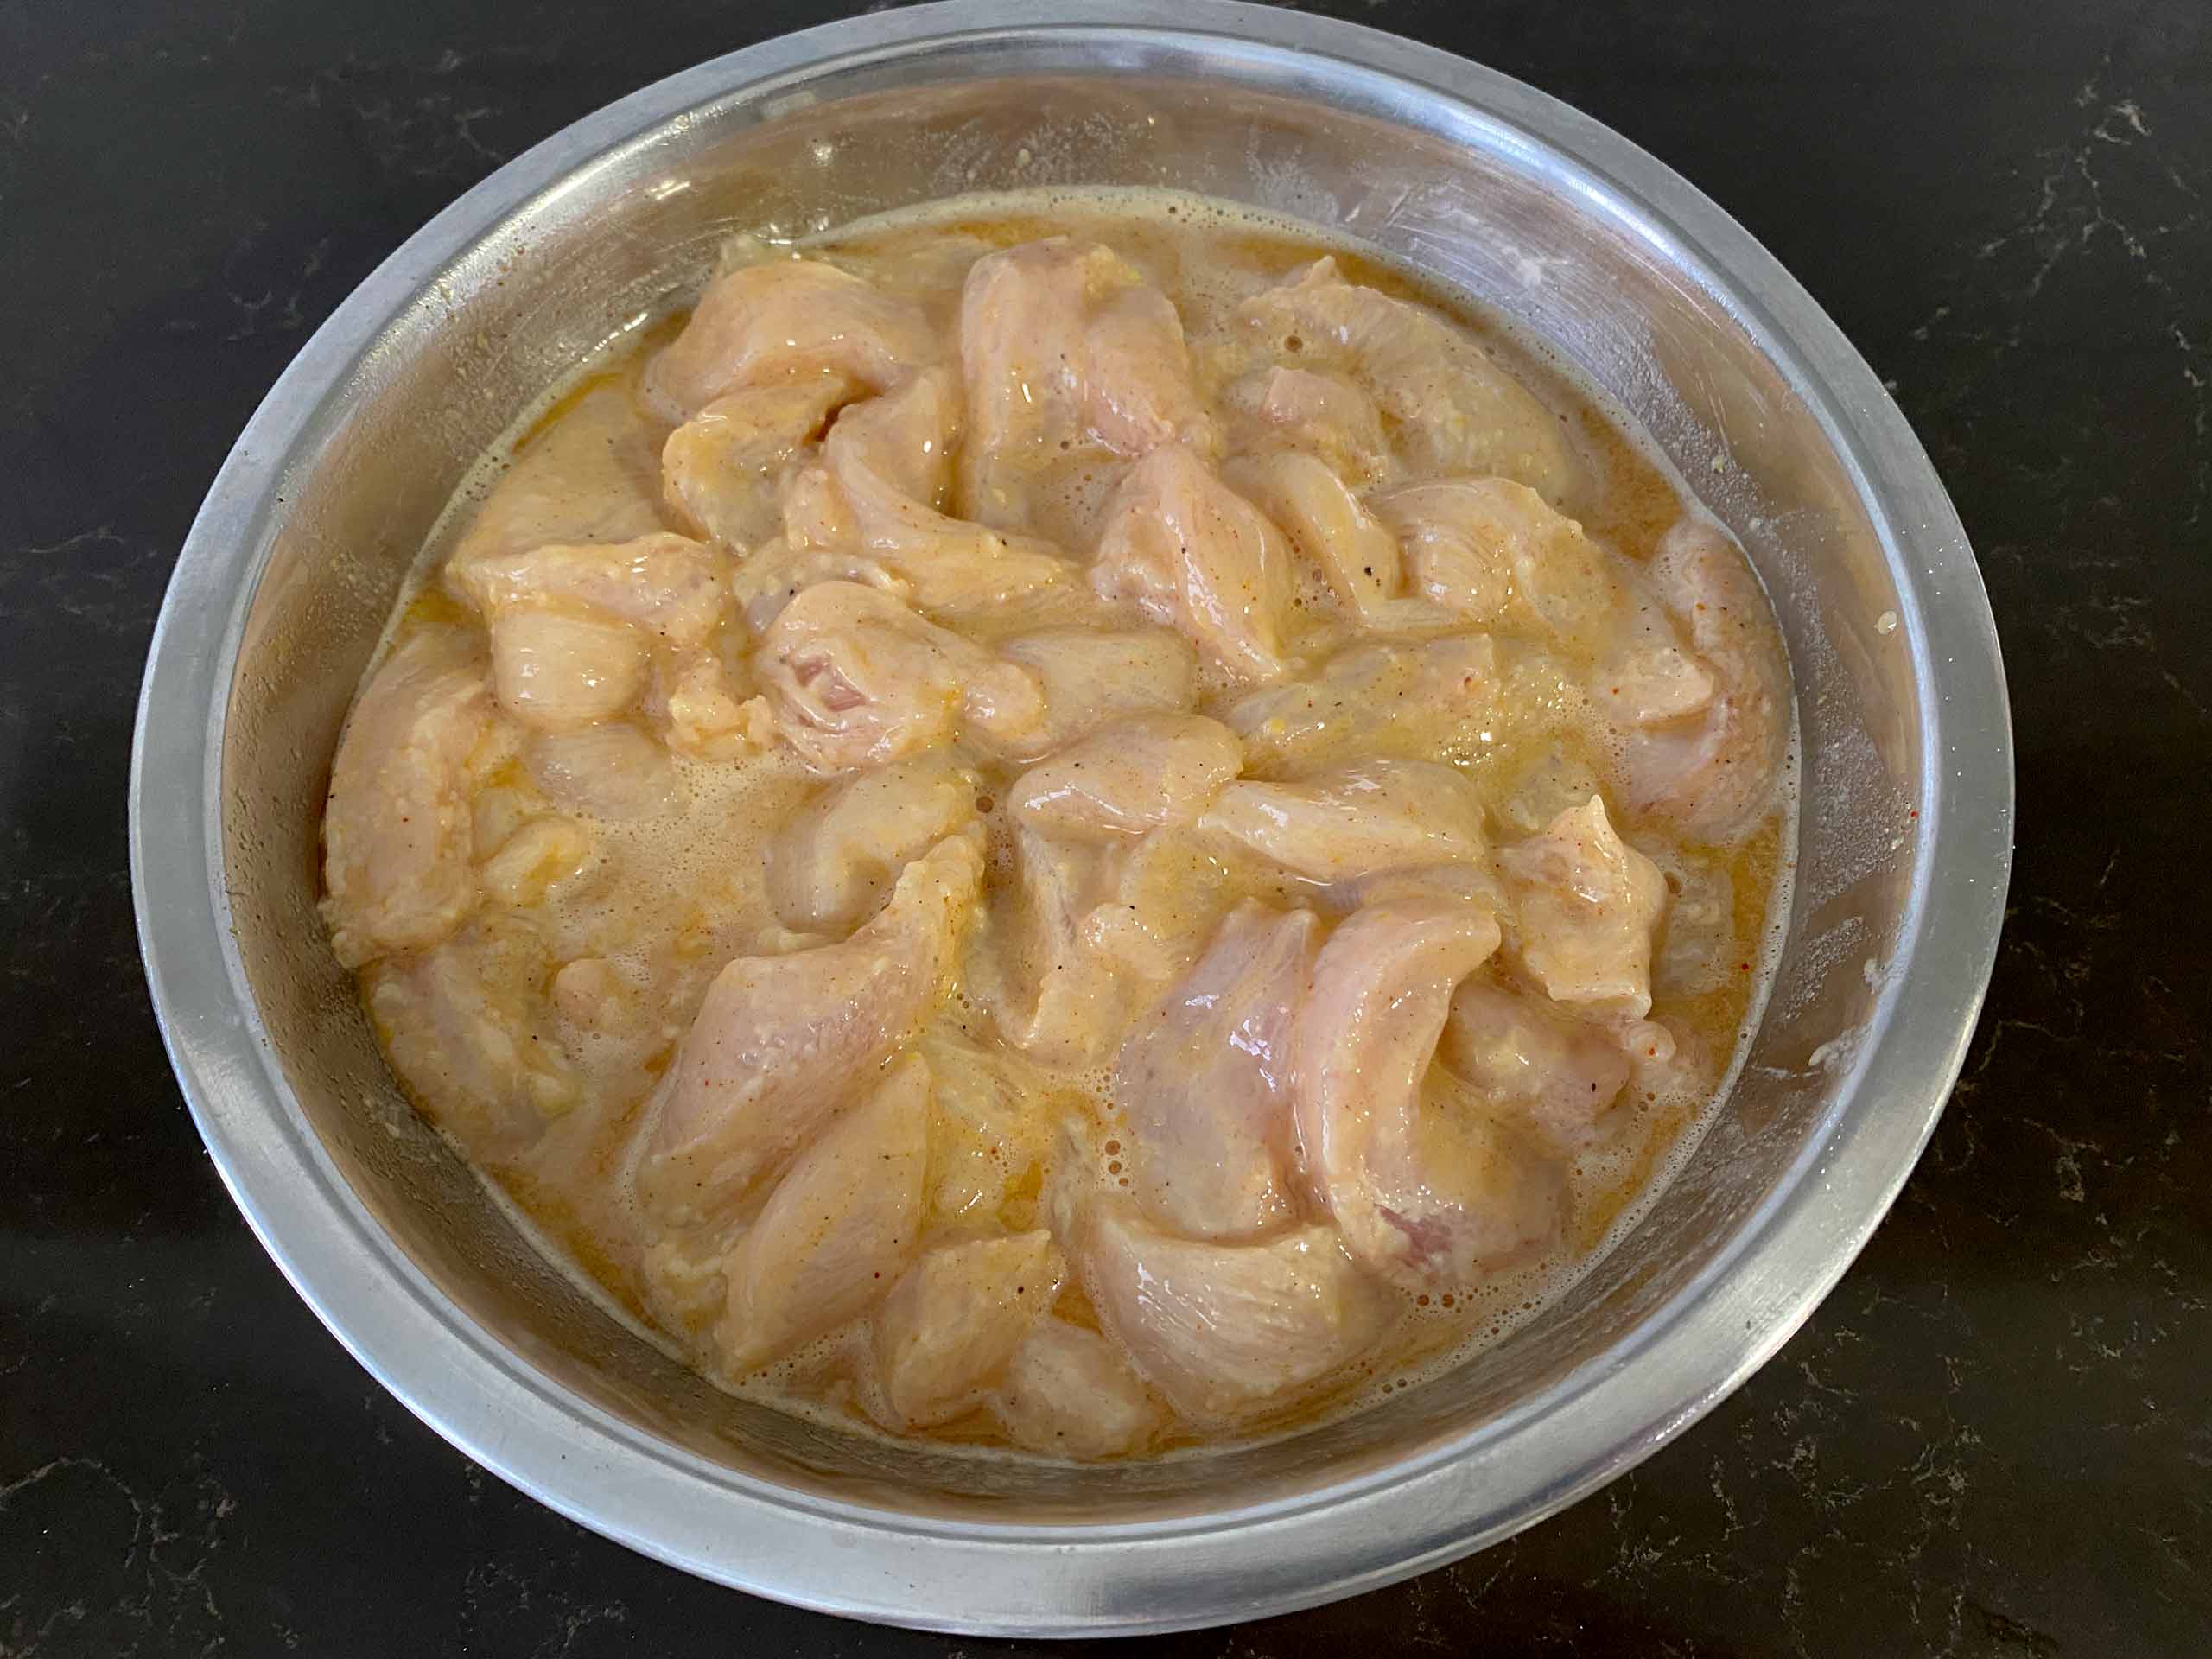 Mix the chicken breast in the batter until it is all well coated.